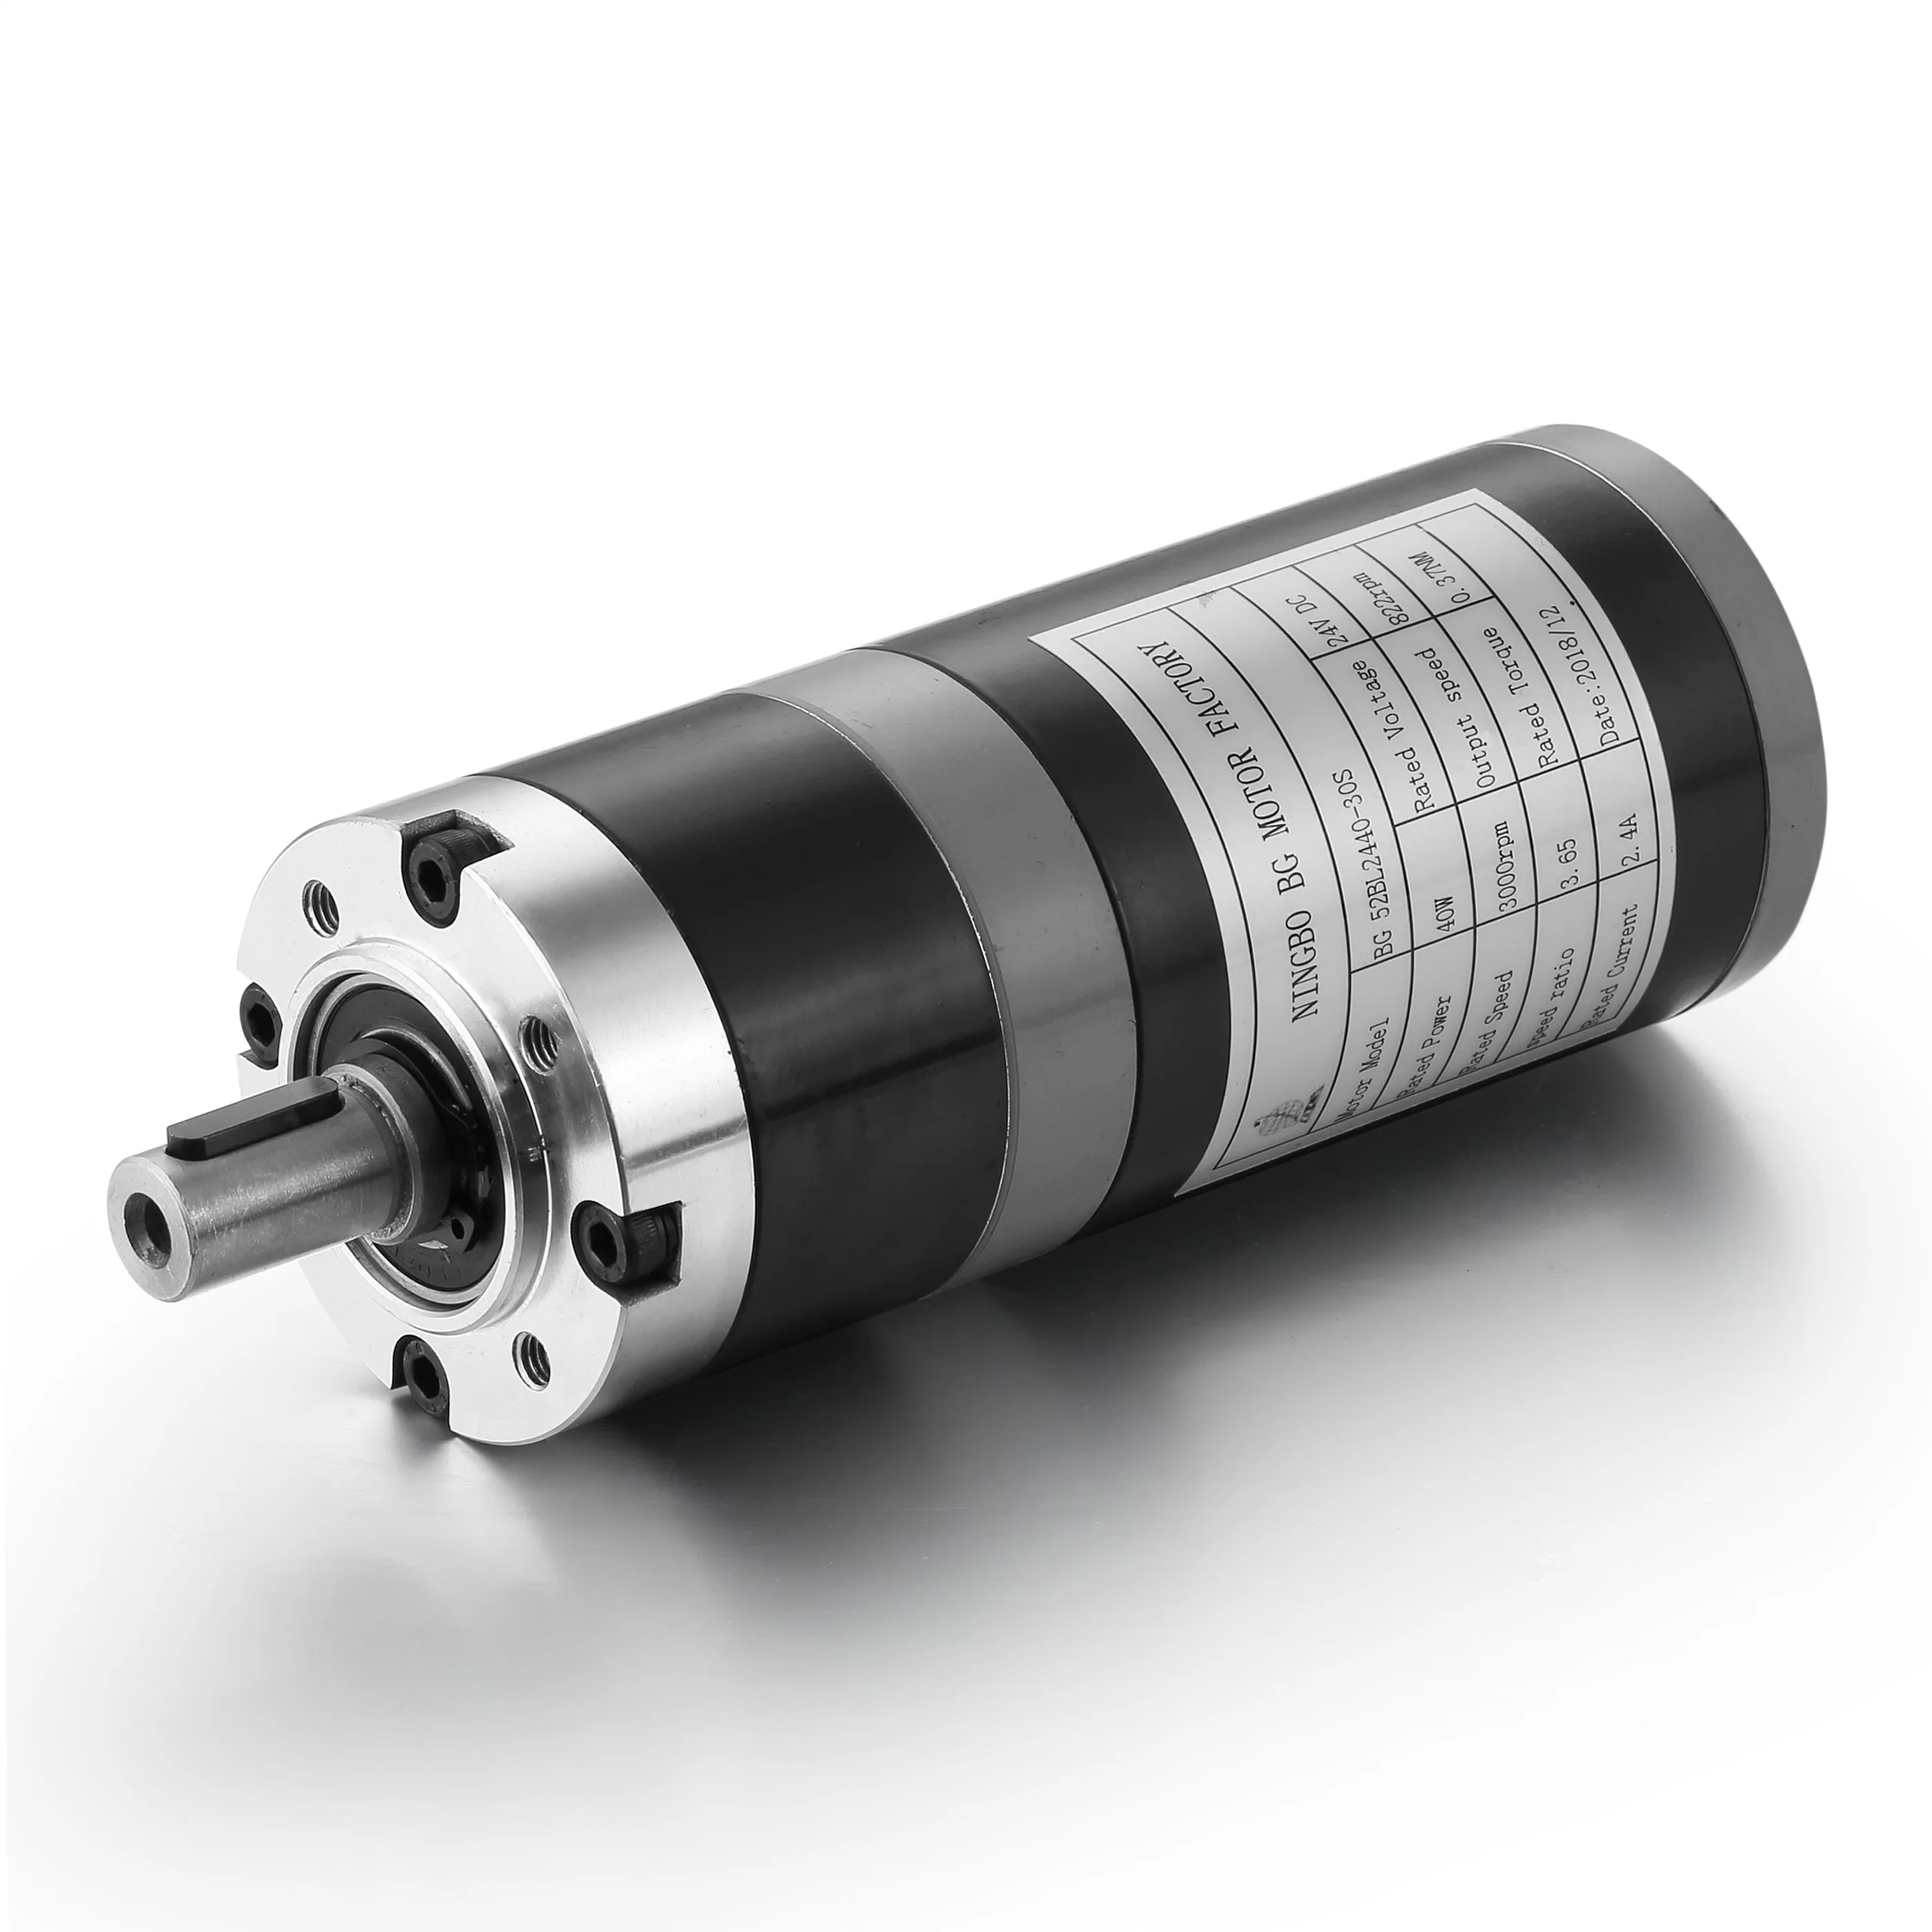 52mm 24V Electric Brushless DC Planetary Gear Motor High Torque Low Rpm Slotless Motor for Industrial Control